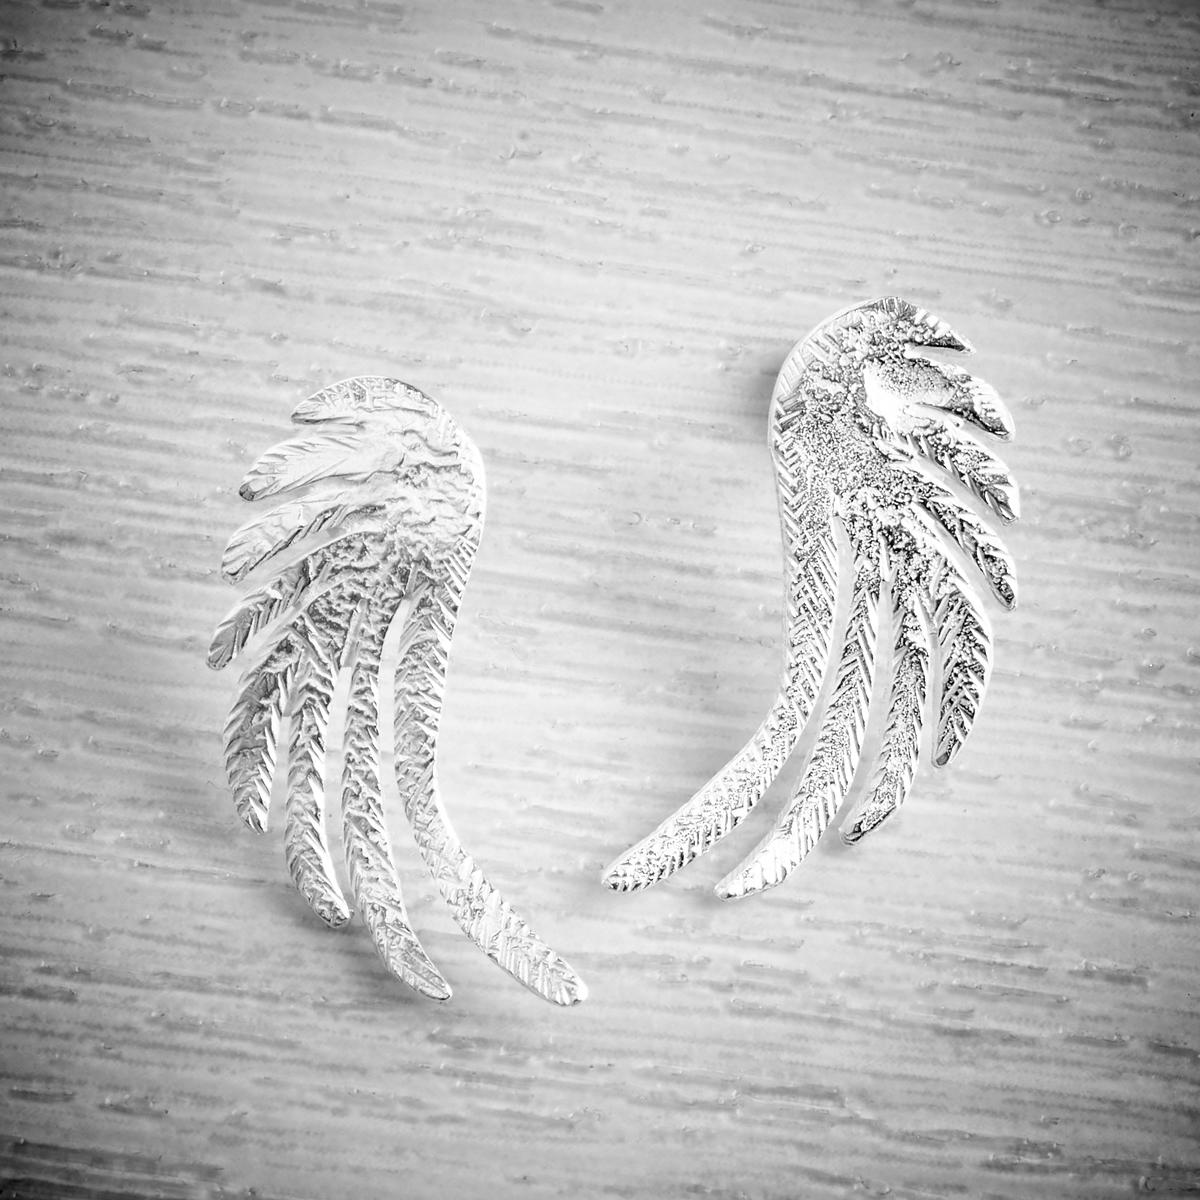 large silver stud angel wing earrings by Fi Mehra available at THE JEWELLERY MAKERS, image property of EMMA WHITE-0